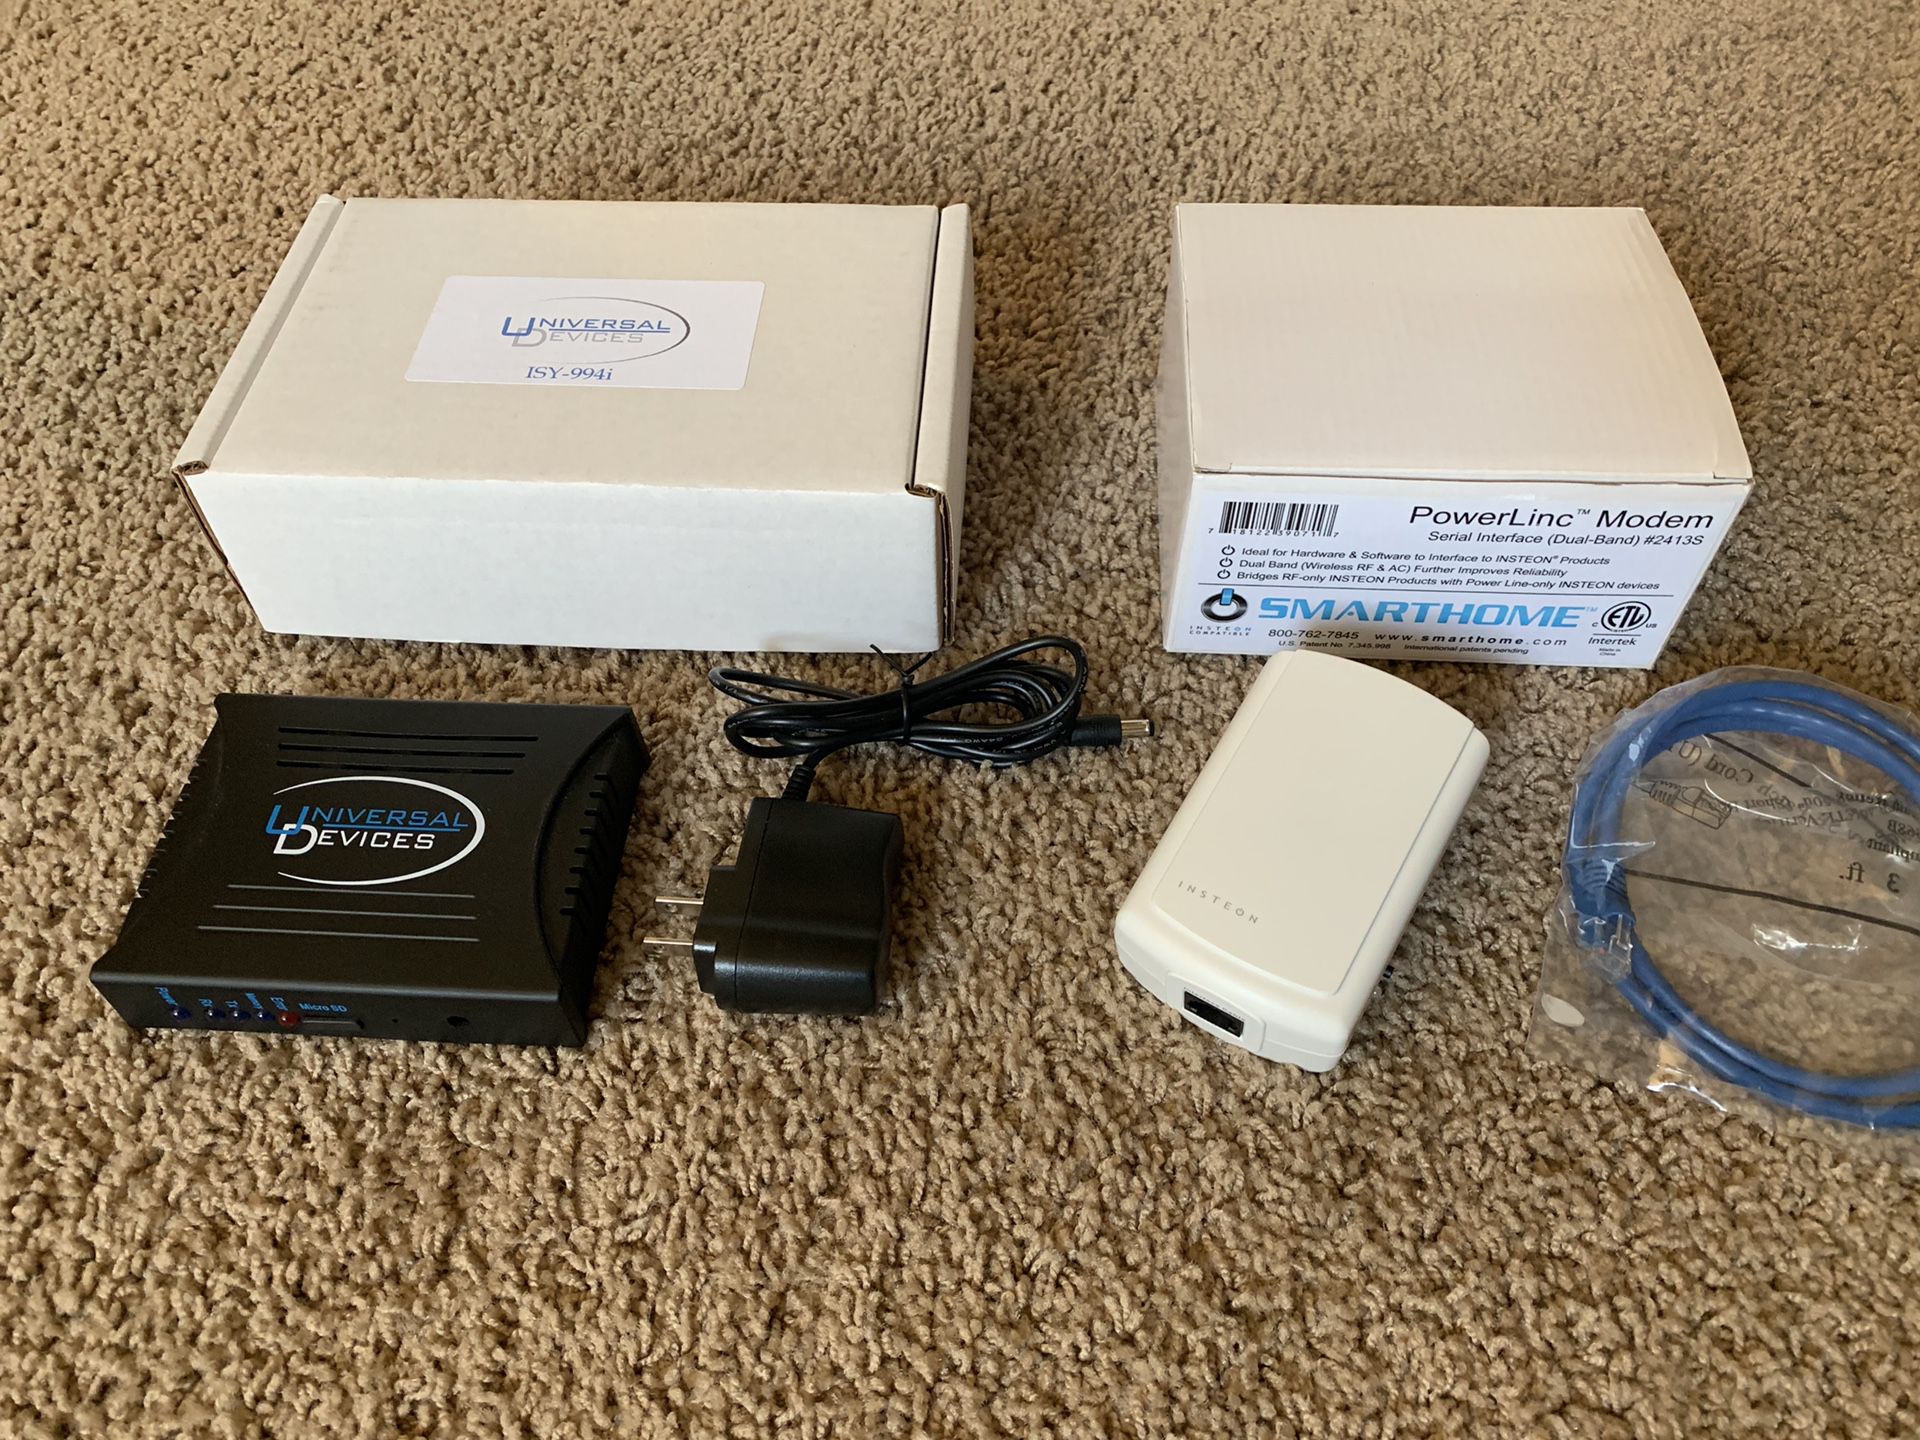 Universal Devices ISY994i Controller kit - Instreon Support and PLM PowerLinc modem